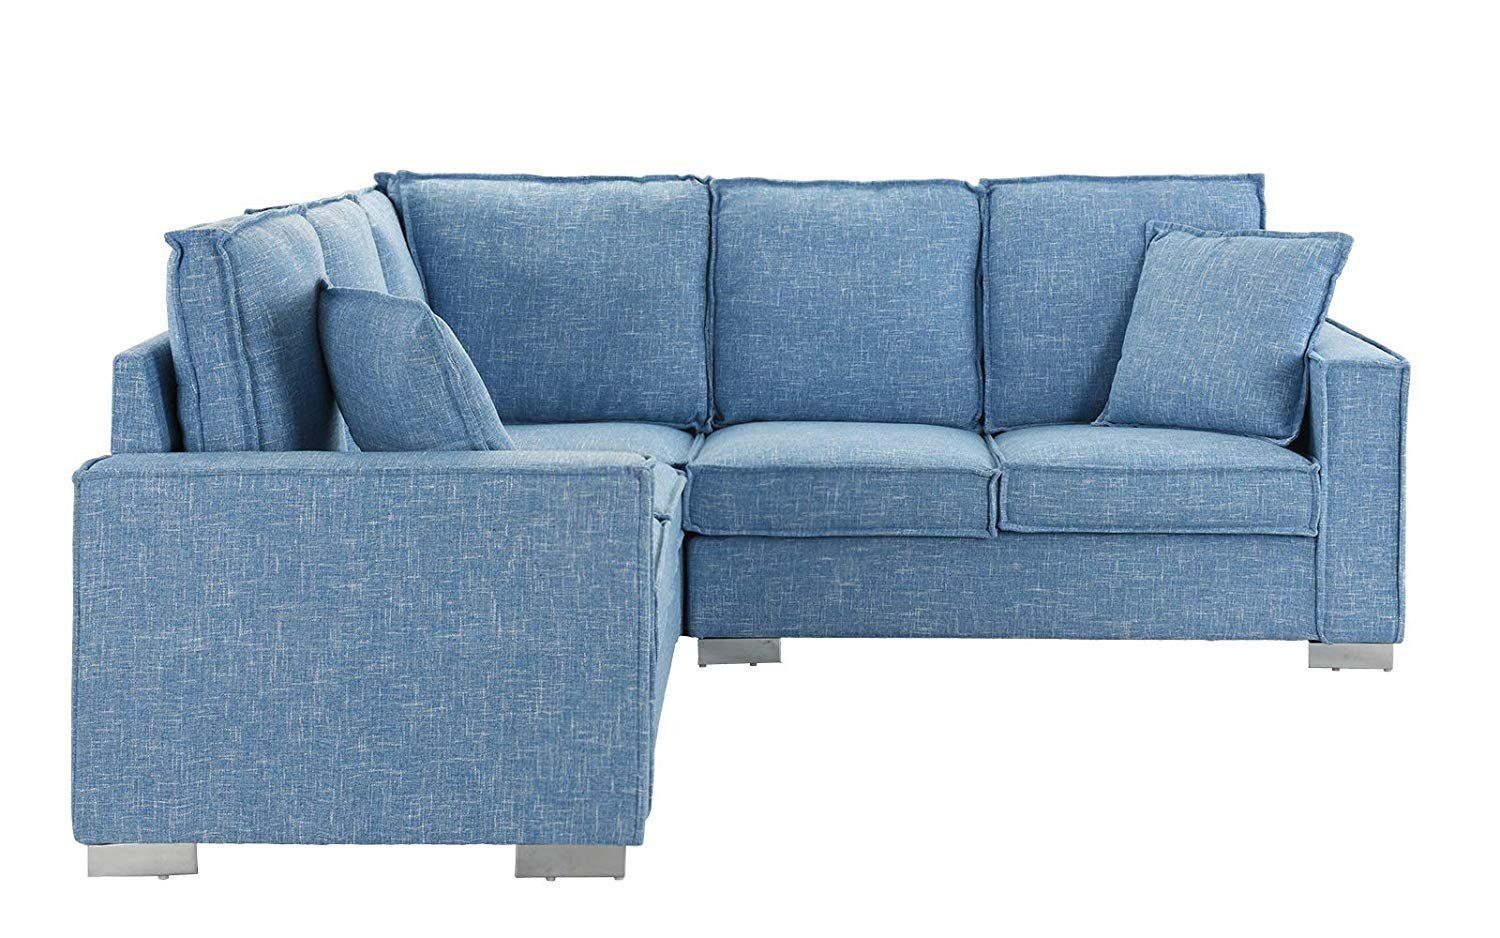 Modern Living Room Linen Fabric Sectional Sofa, L Shape Couch, 2 With Regard To Modern Blue Linen Sofas (Gallery 2 of 20)